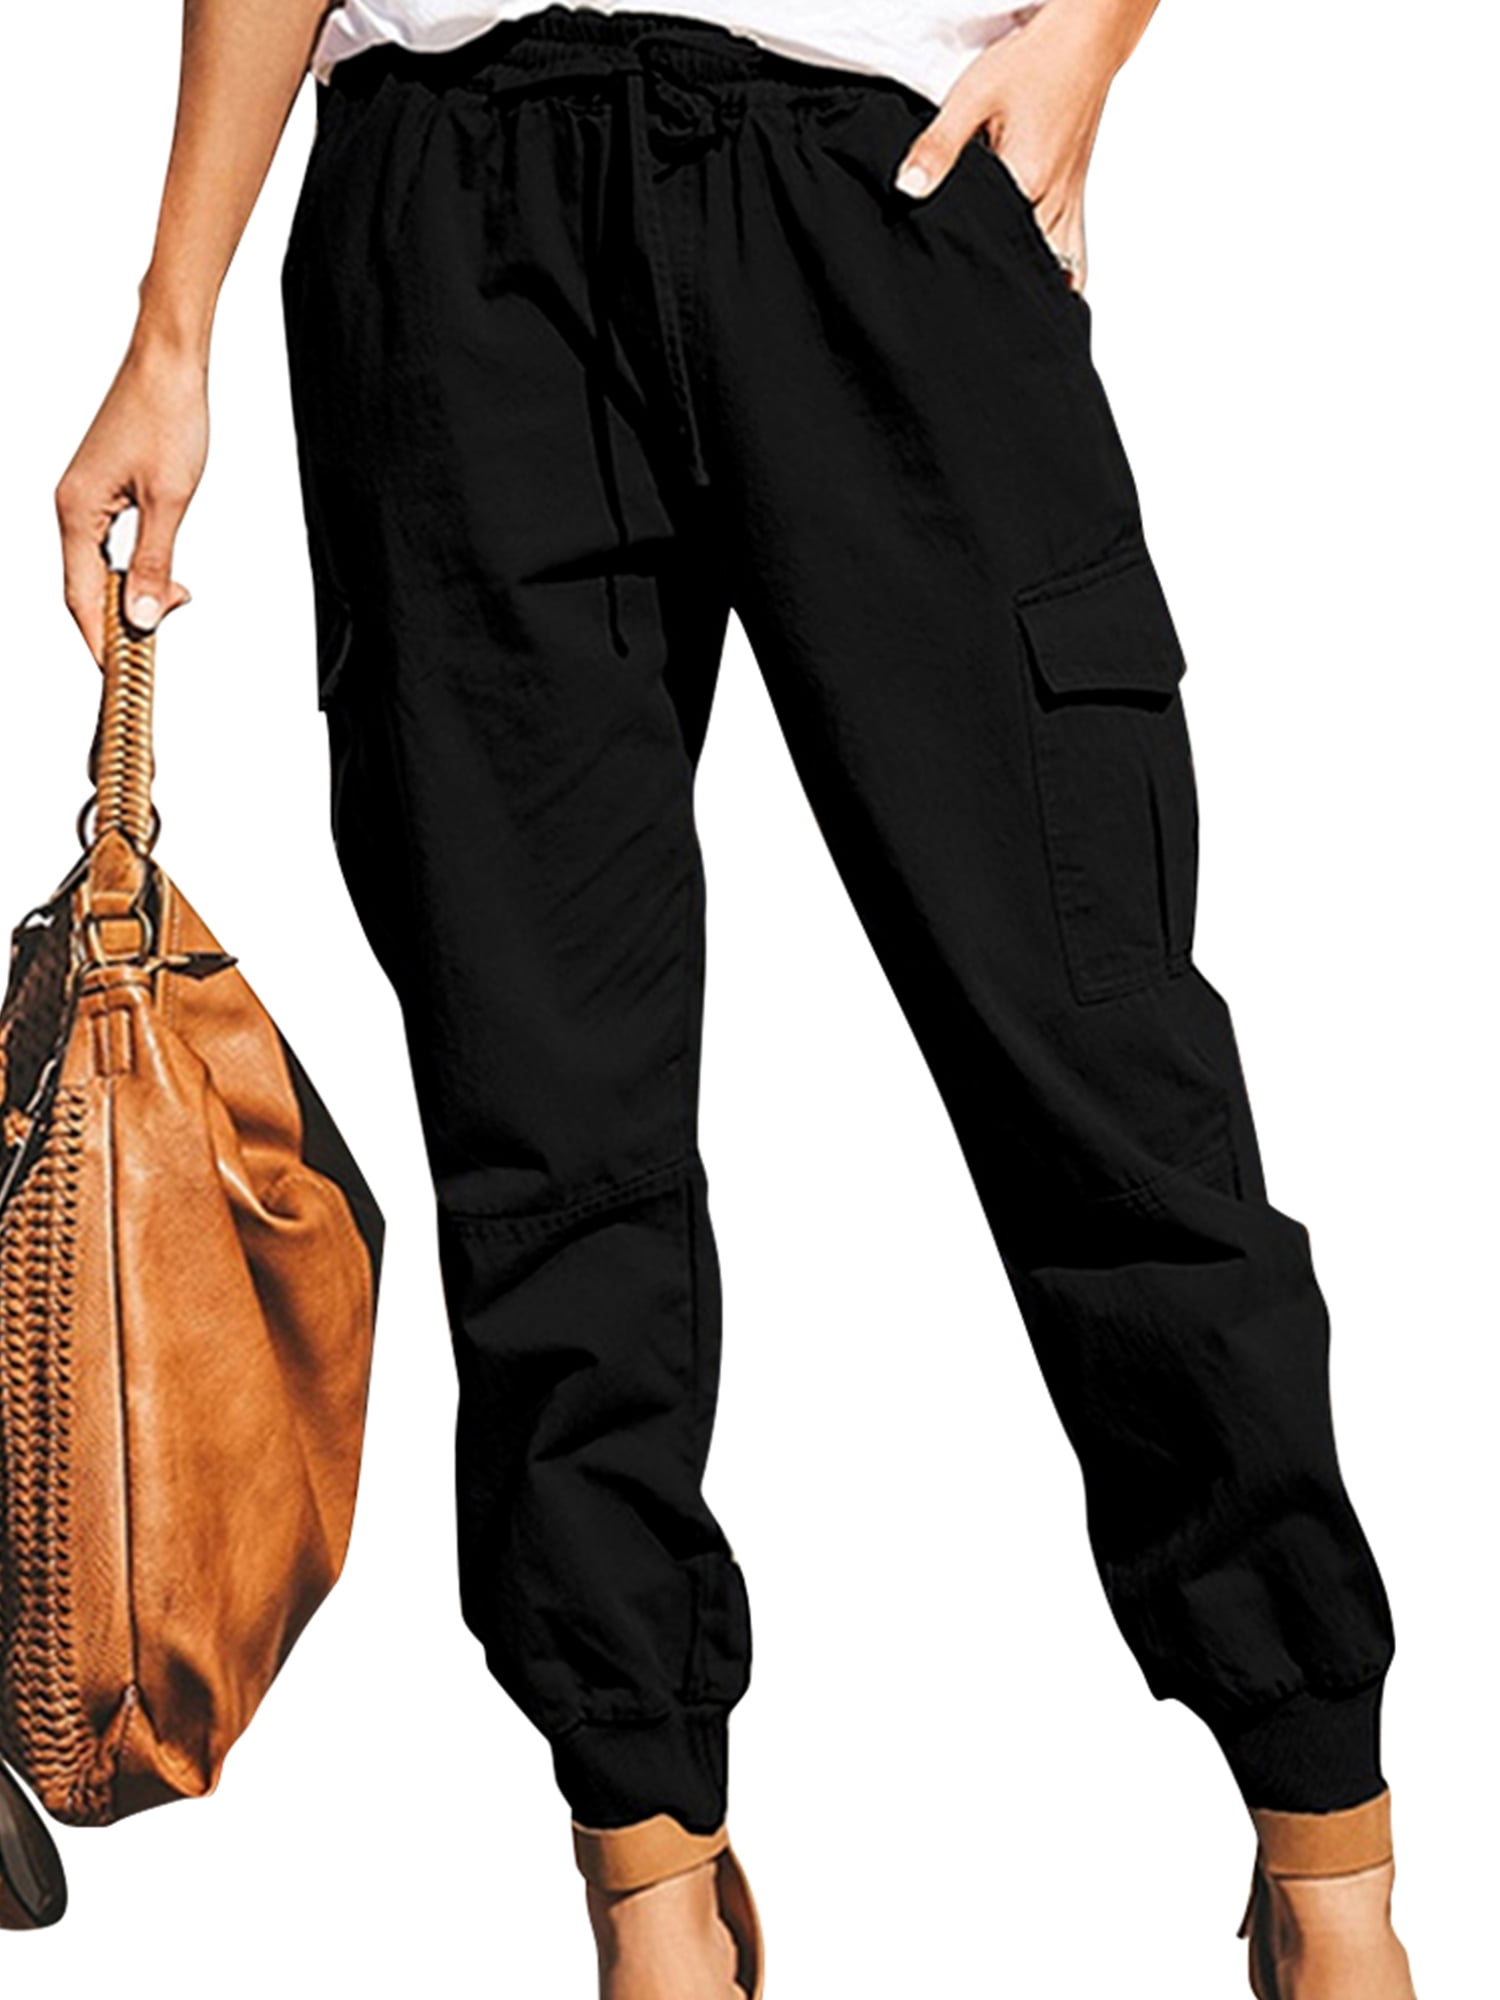 Military Unisex Army Cargo Pants Overalls Street Dance Pockets Casual Trousers @ 